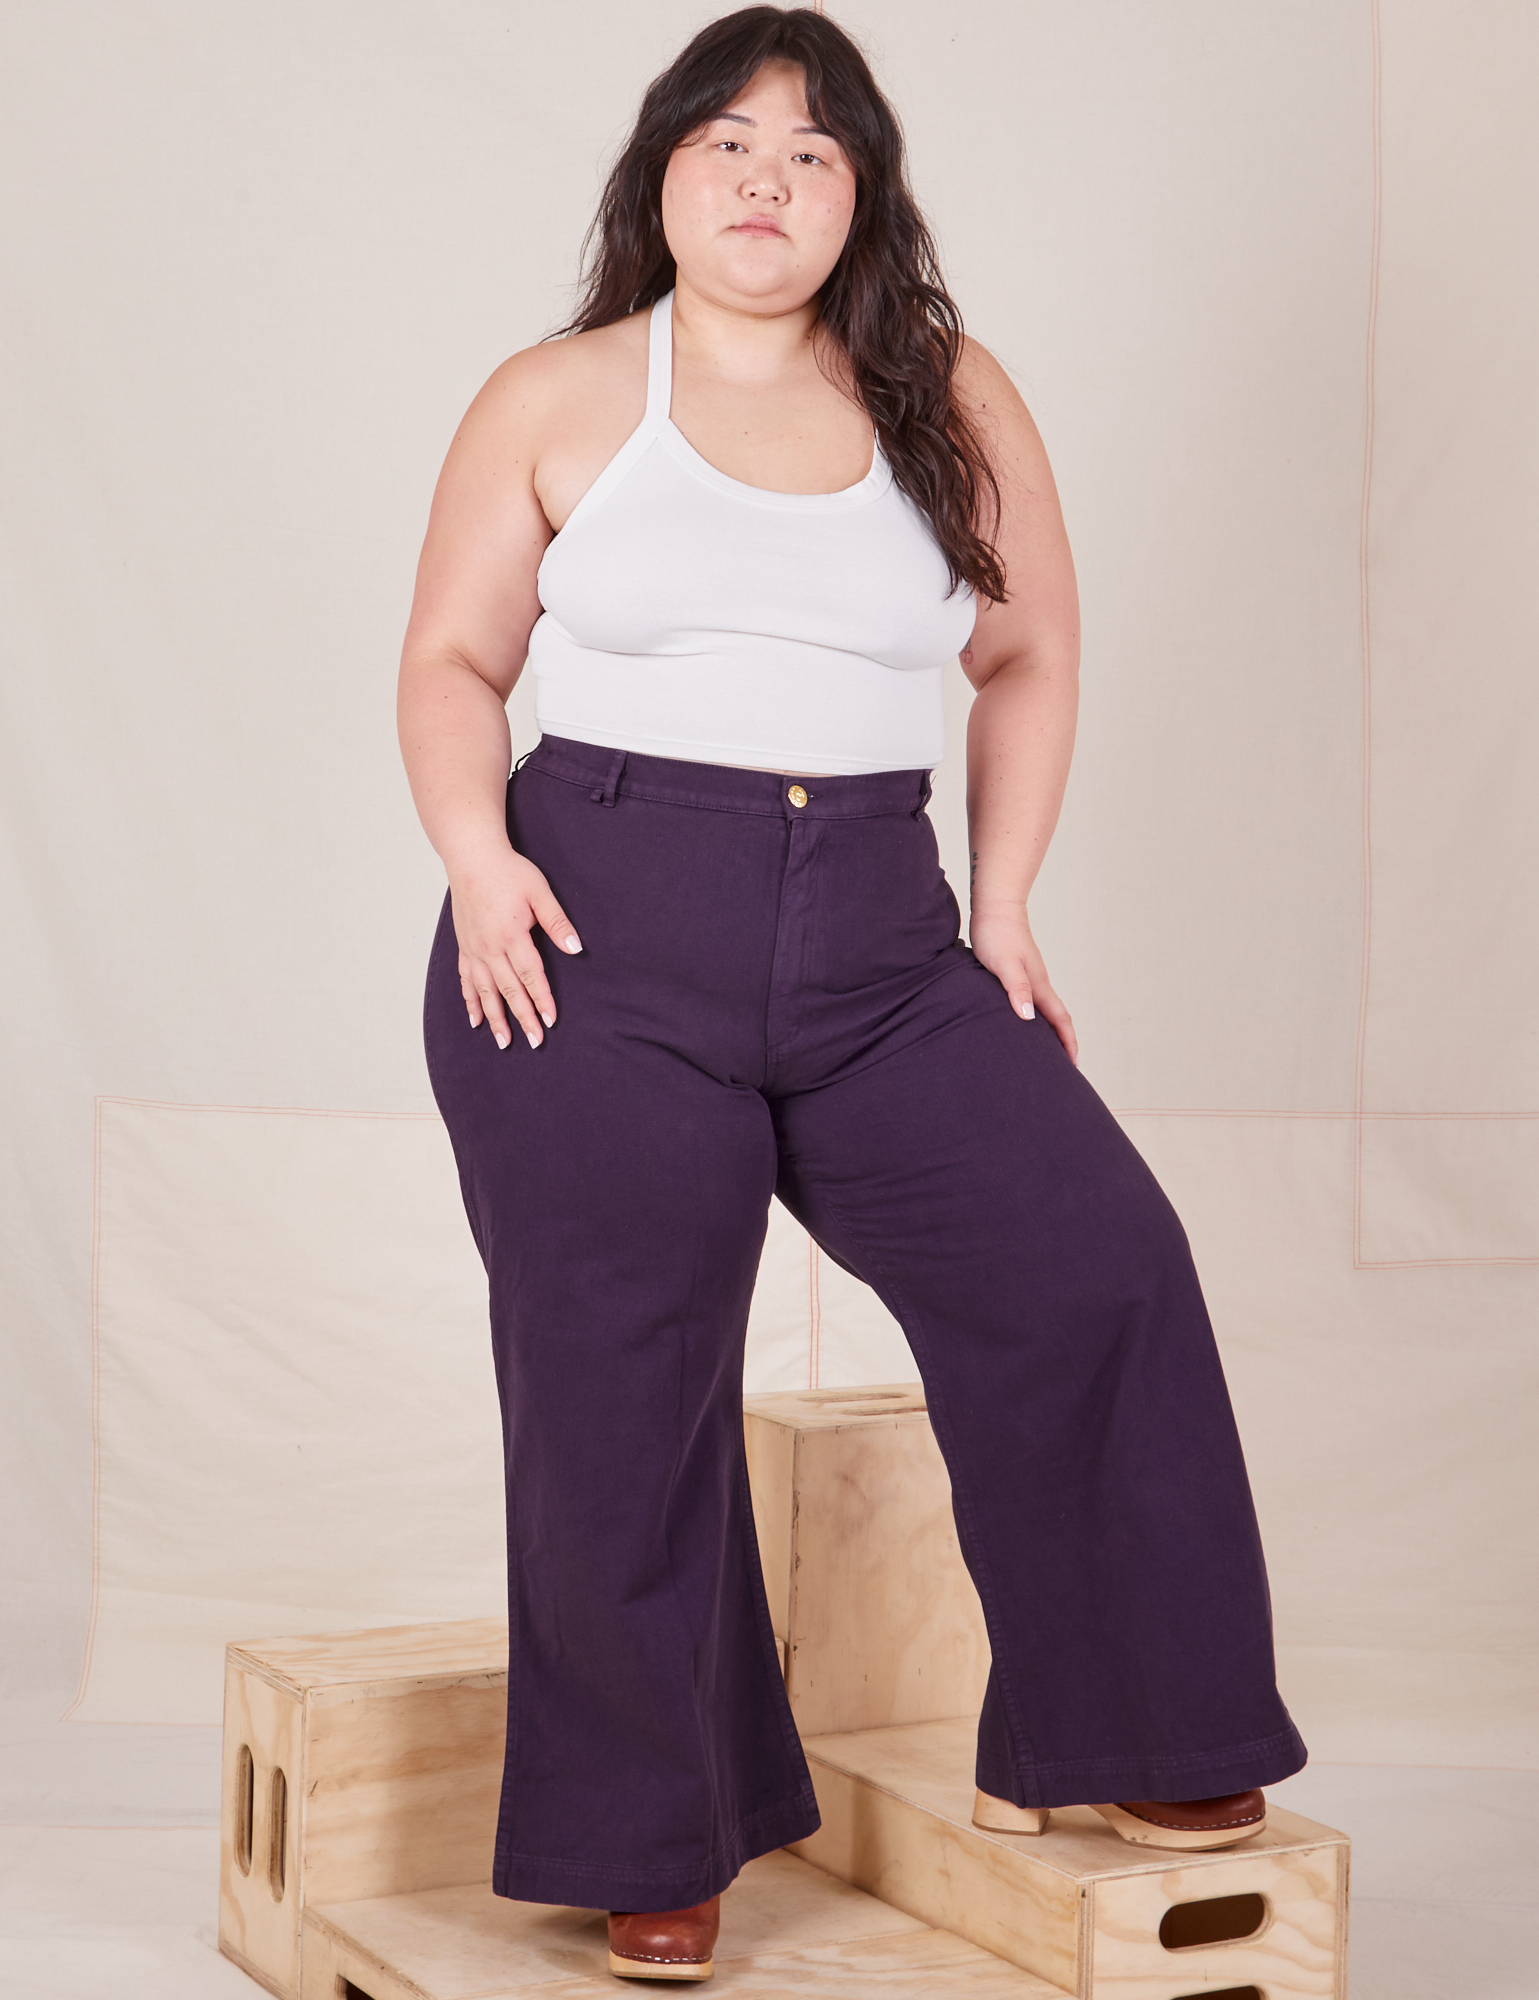 Ashley is 5&#39;7&quot; and wearing 1XL Bell Bottoms in Nebula Purple paired with Halter Top in vintage tee off-white